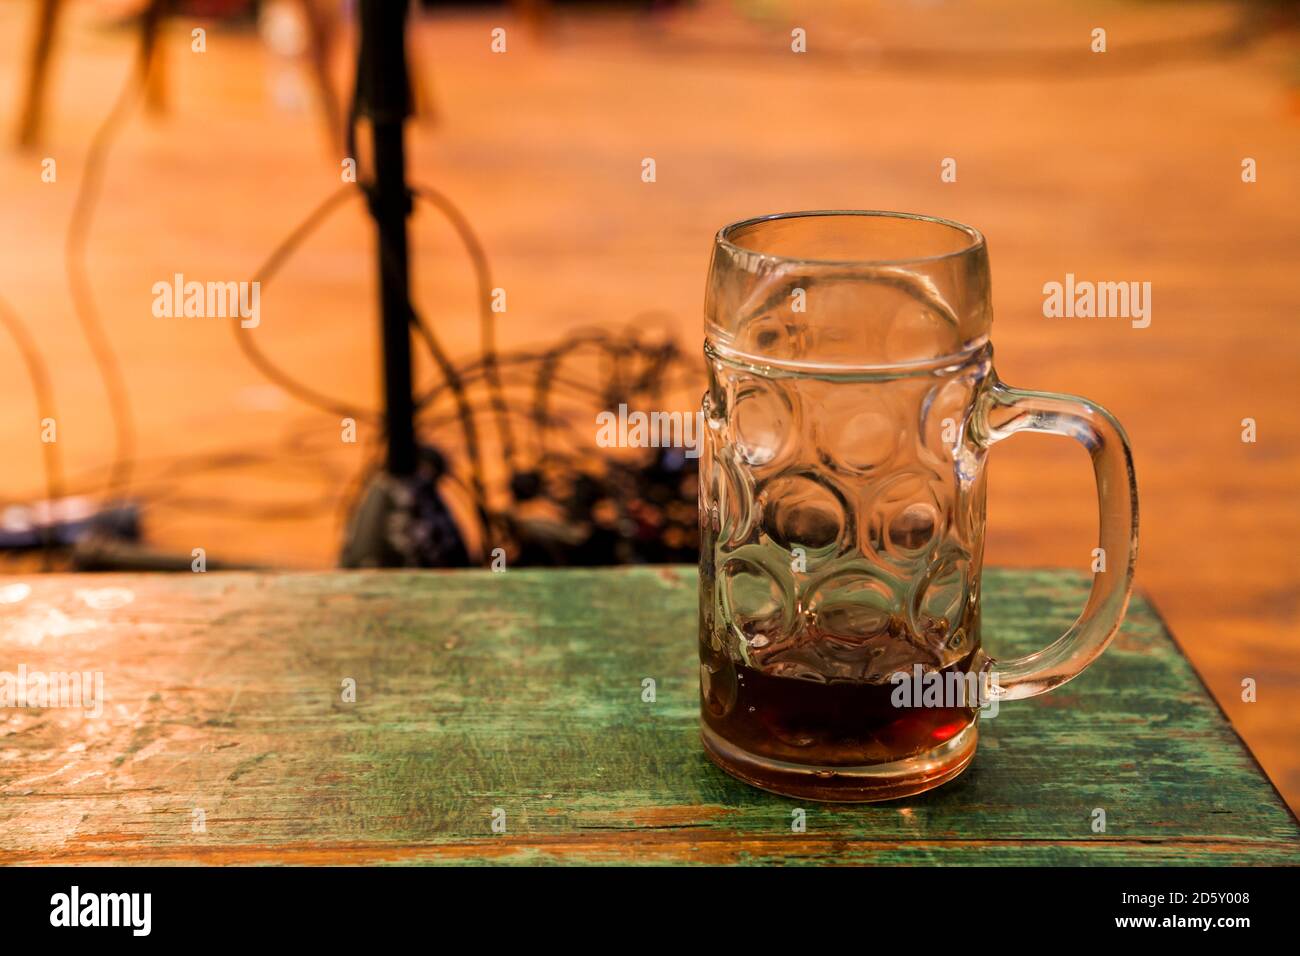 Germany, Munich,  Oktoberfest, Beer jug on wooden table, stage equipment in background Stock Photo